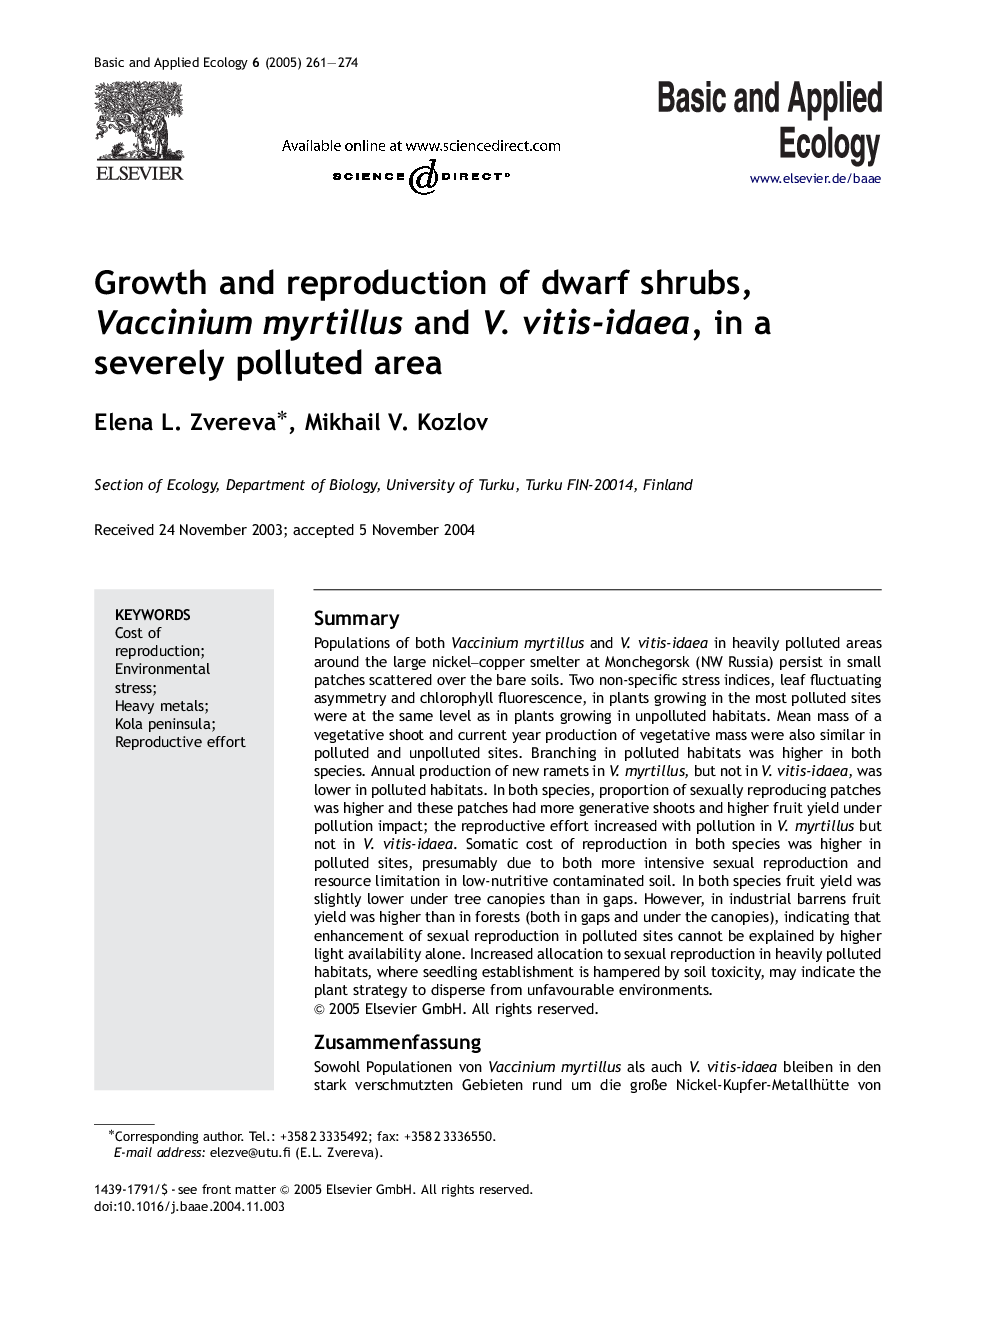 Growth and reproduction of dwarf shrubs, Vaccinium myrtillus and V. vitis-idaea, in a severely polluted area